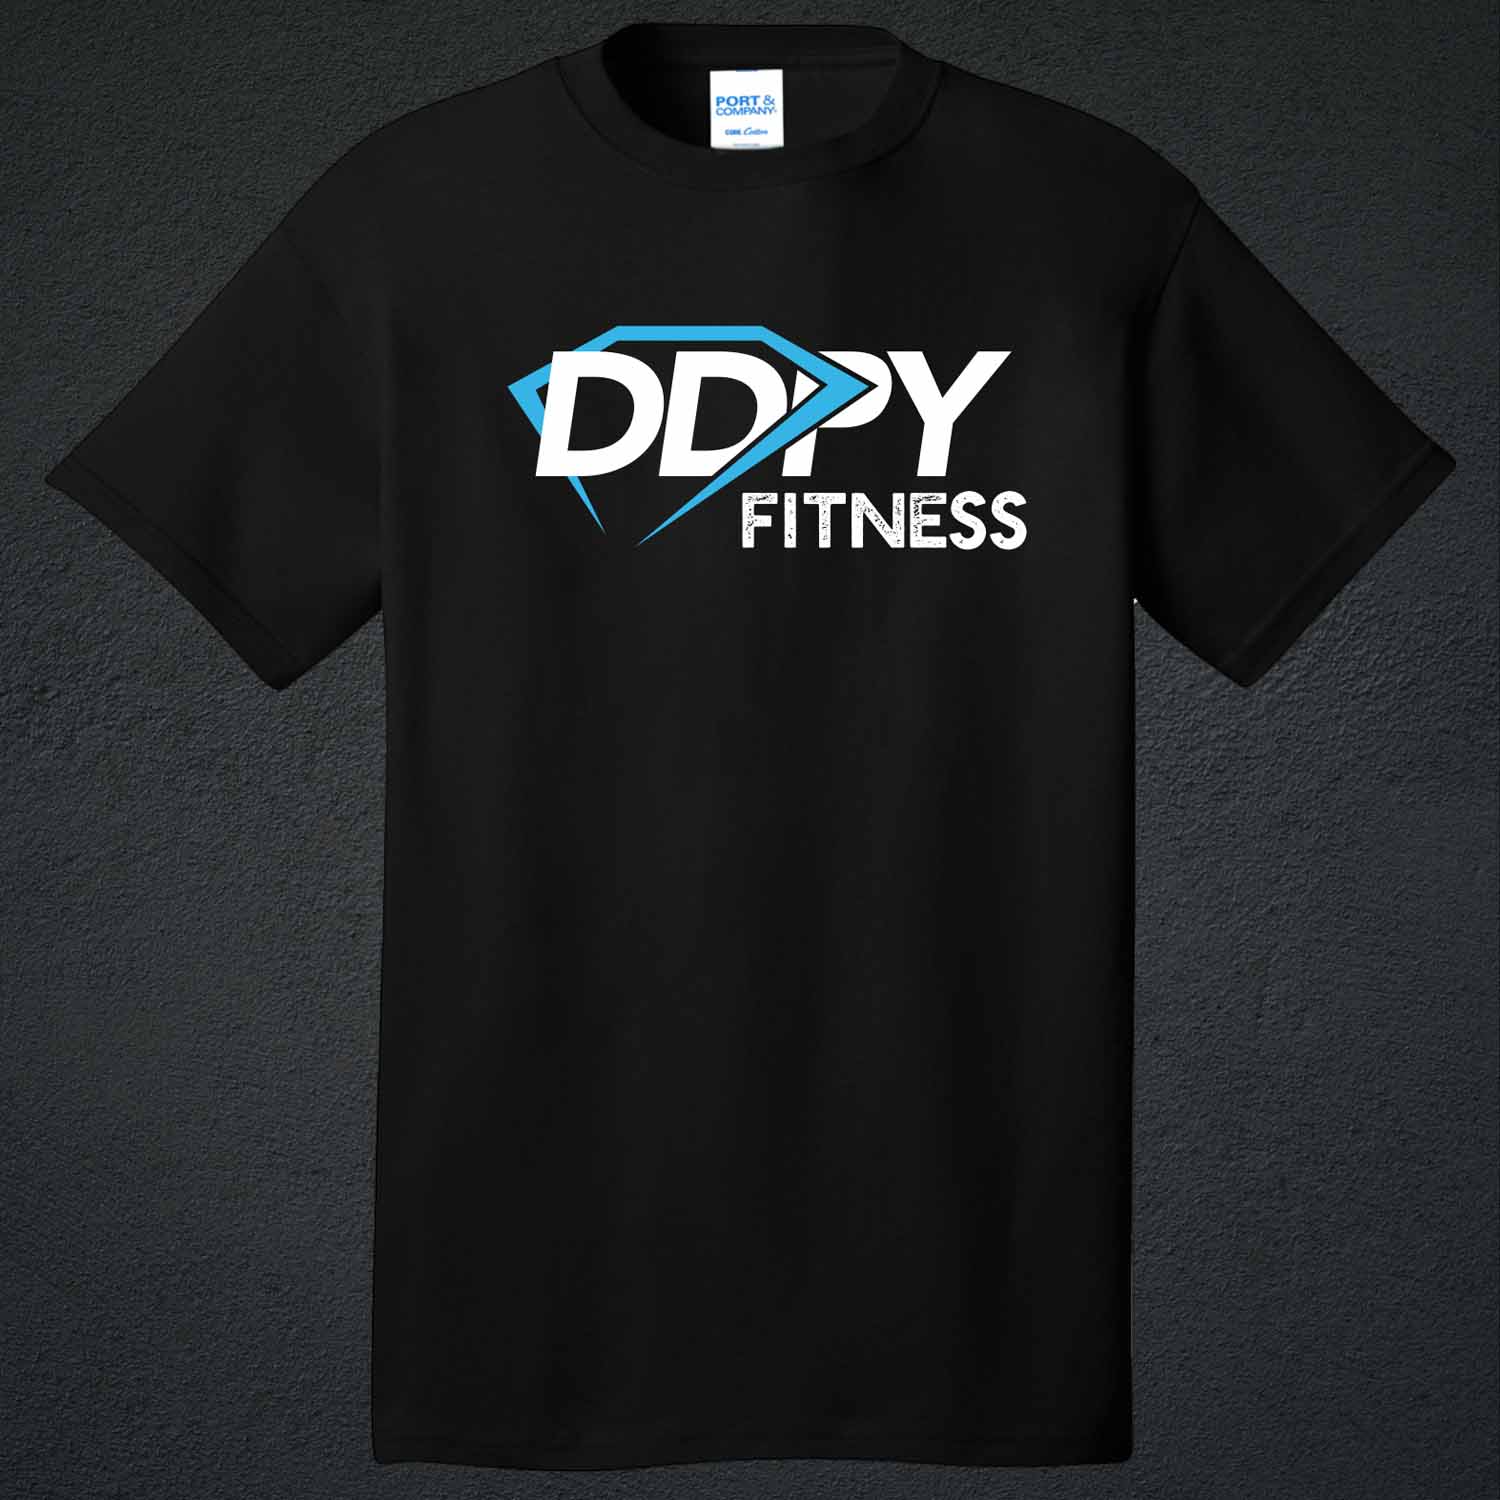 DDPY Fitness T-Shirt